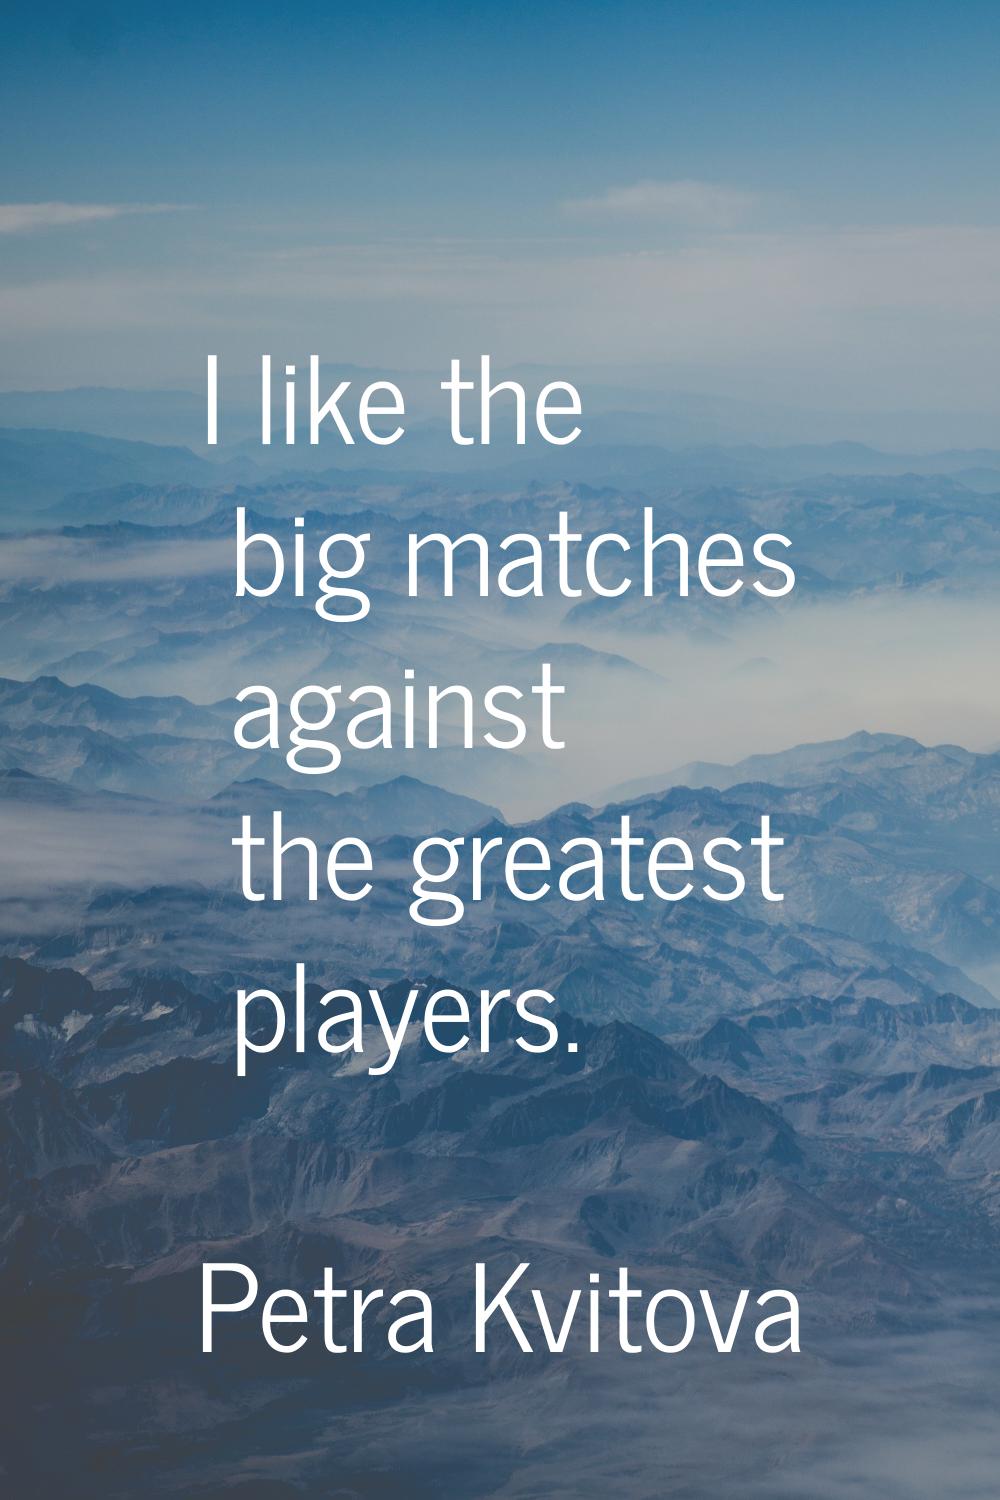 I like the big matches against the greatest players.